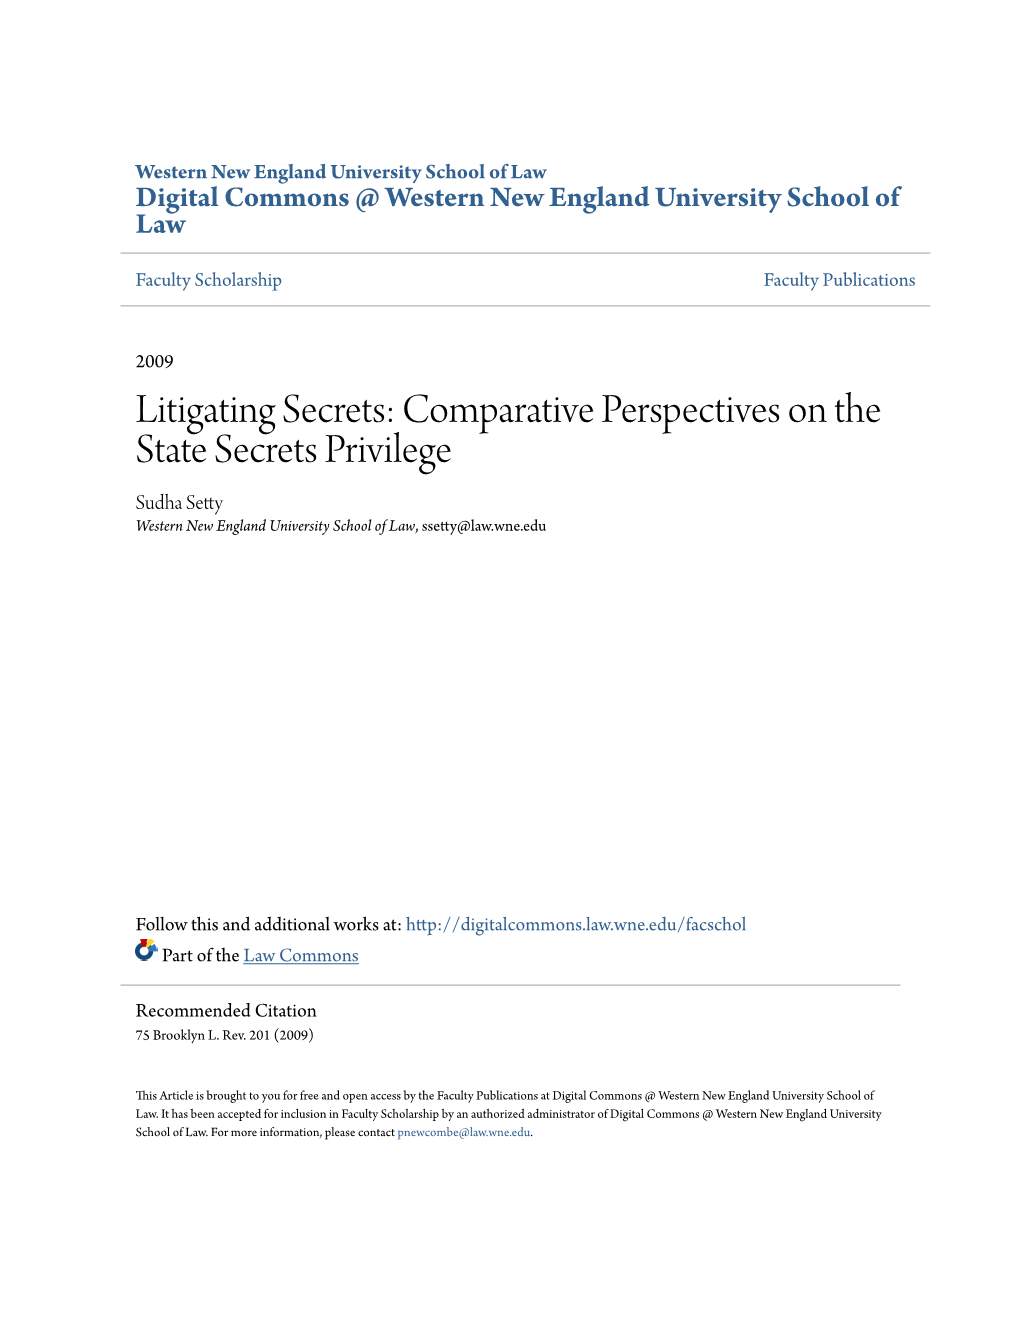 Comparative Perspectives on the State Secrets Privilege Sudha Setty Western New England University School of Law, Ssetty@Law.Wne.Edu